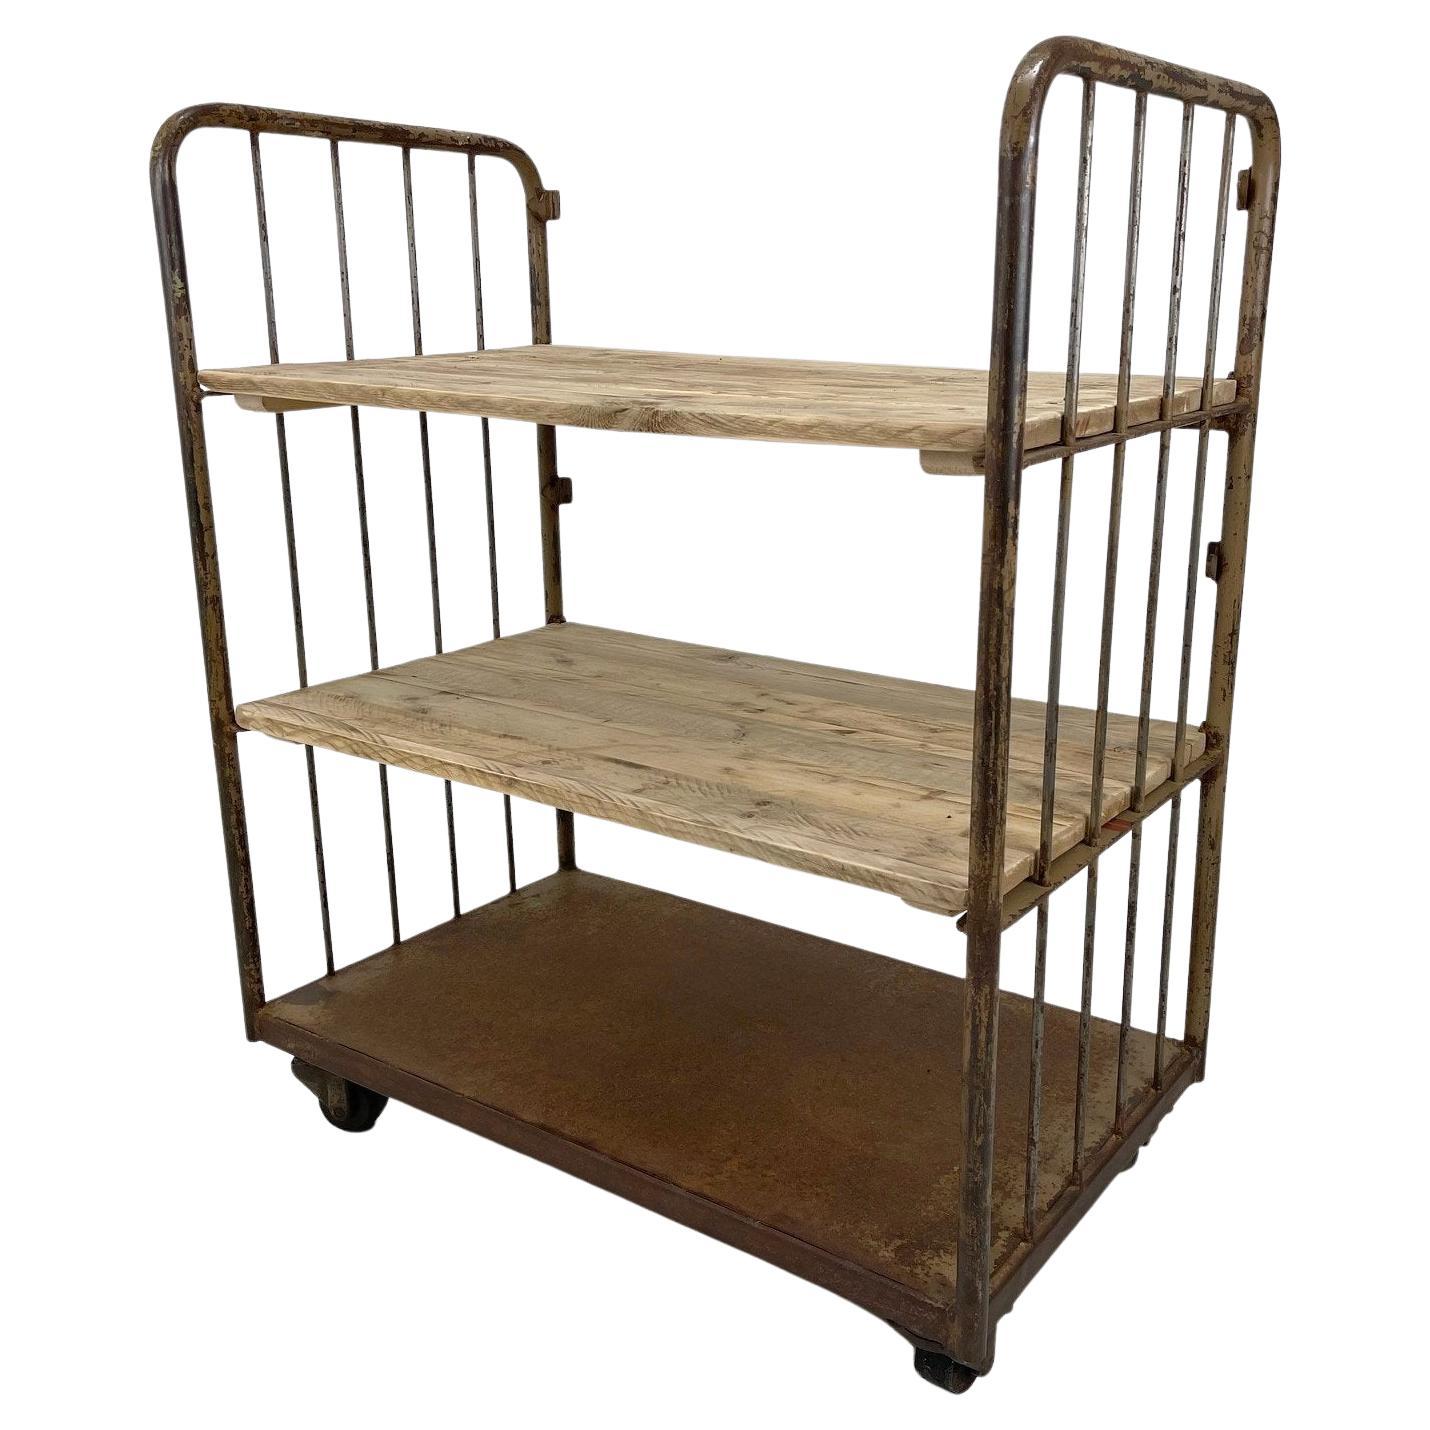 Vintage Industrial Iron and Wood Shelves on Wheels